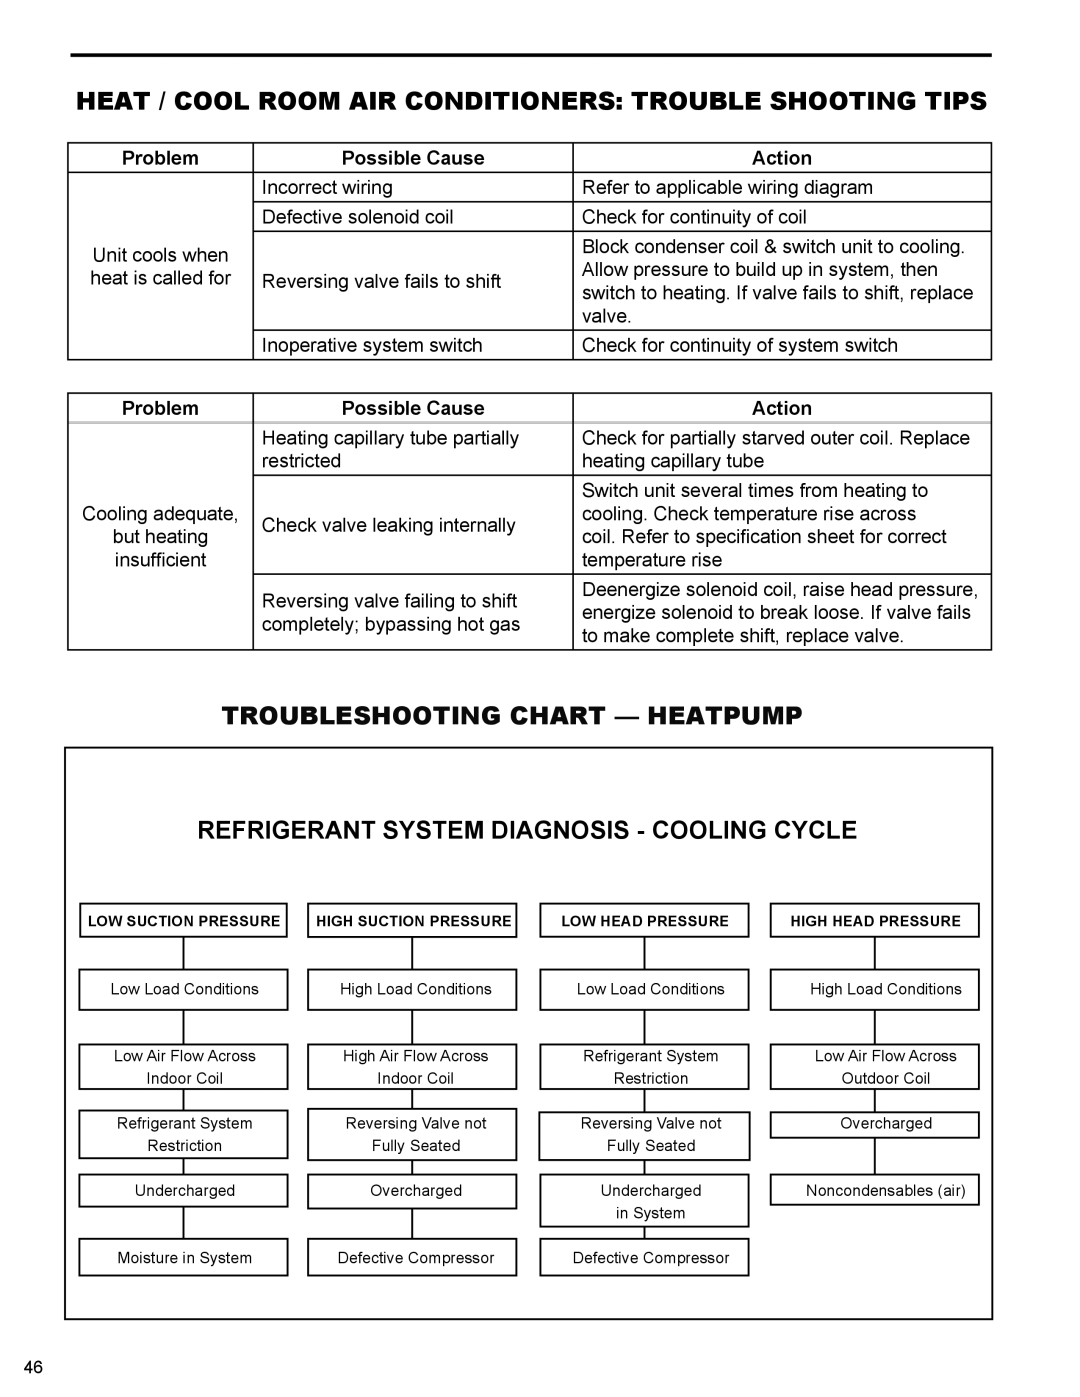 Friedrich 2008 Troubleshooting Chart - Heatpump, Refrigerant System Diagnosis - Cooling Cycle, Problem, Possible Cause 